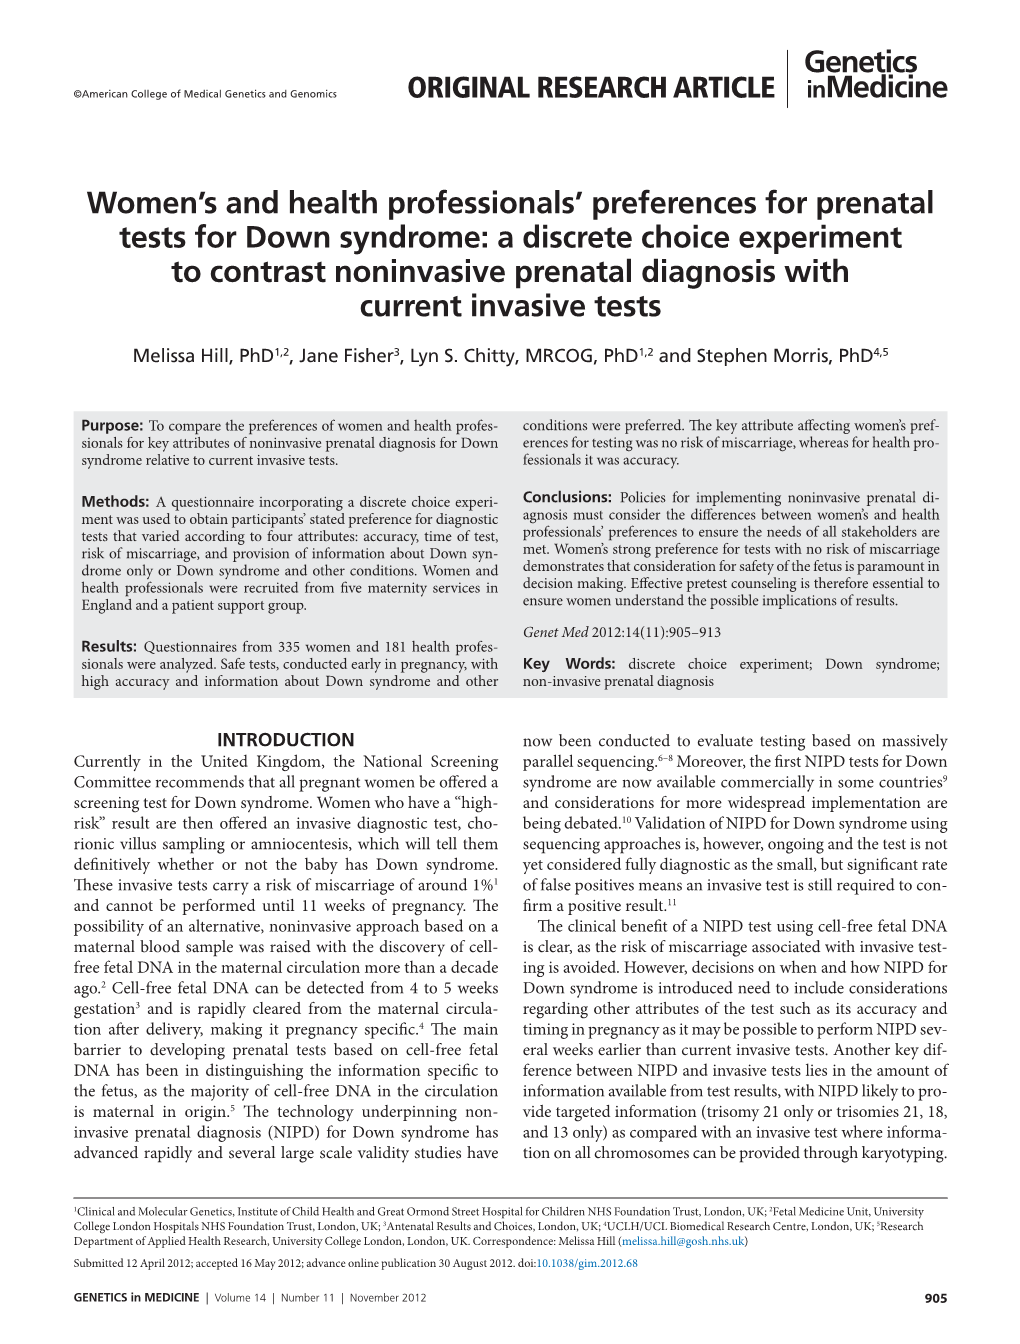 Women's and Health Professionals' Preferences for Prenatal Tests For